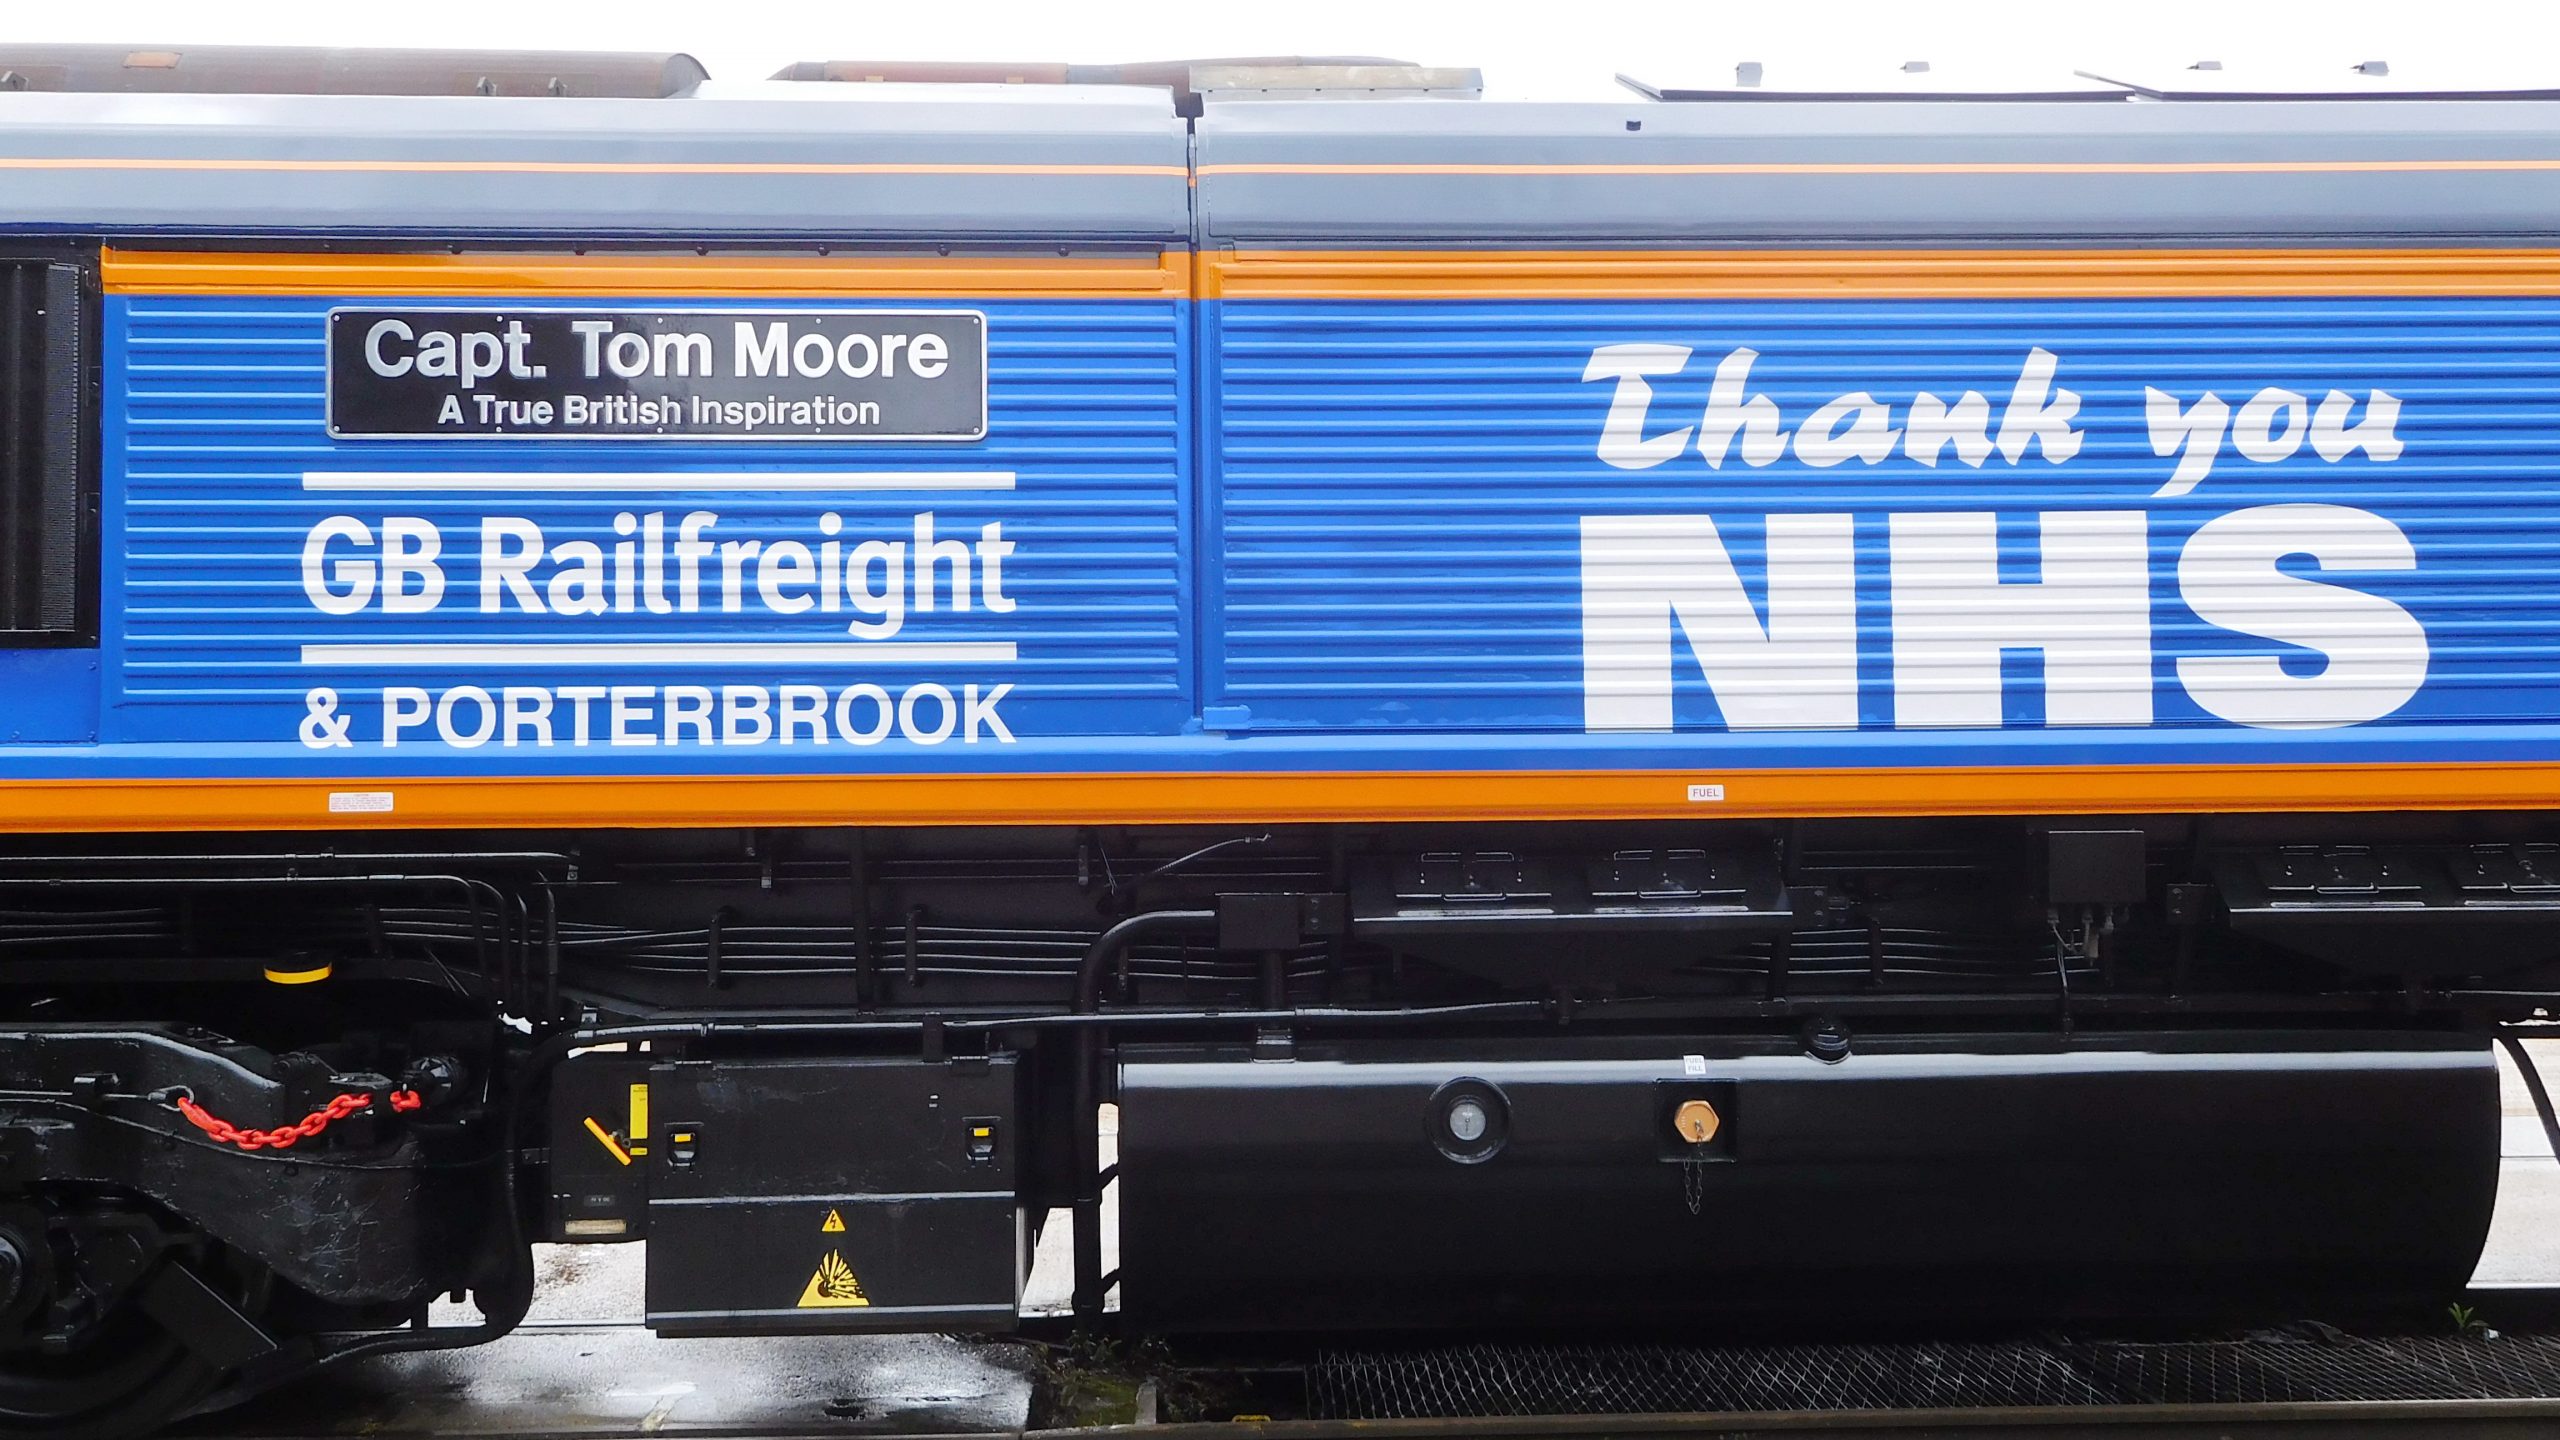 GB Railfreight thanks Capt. Tom Moore for his NHS fundraising with loco naming